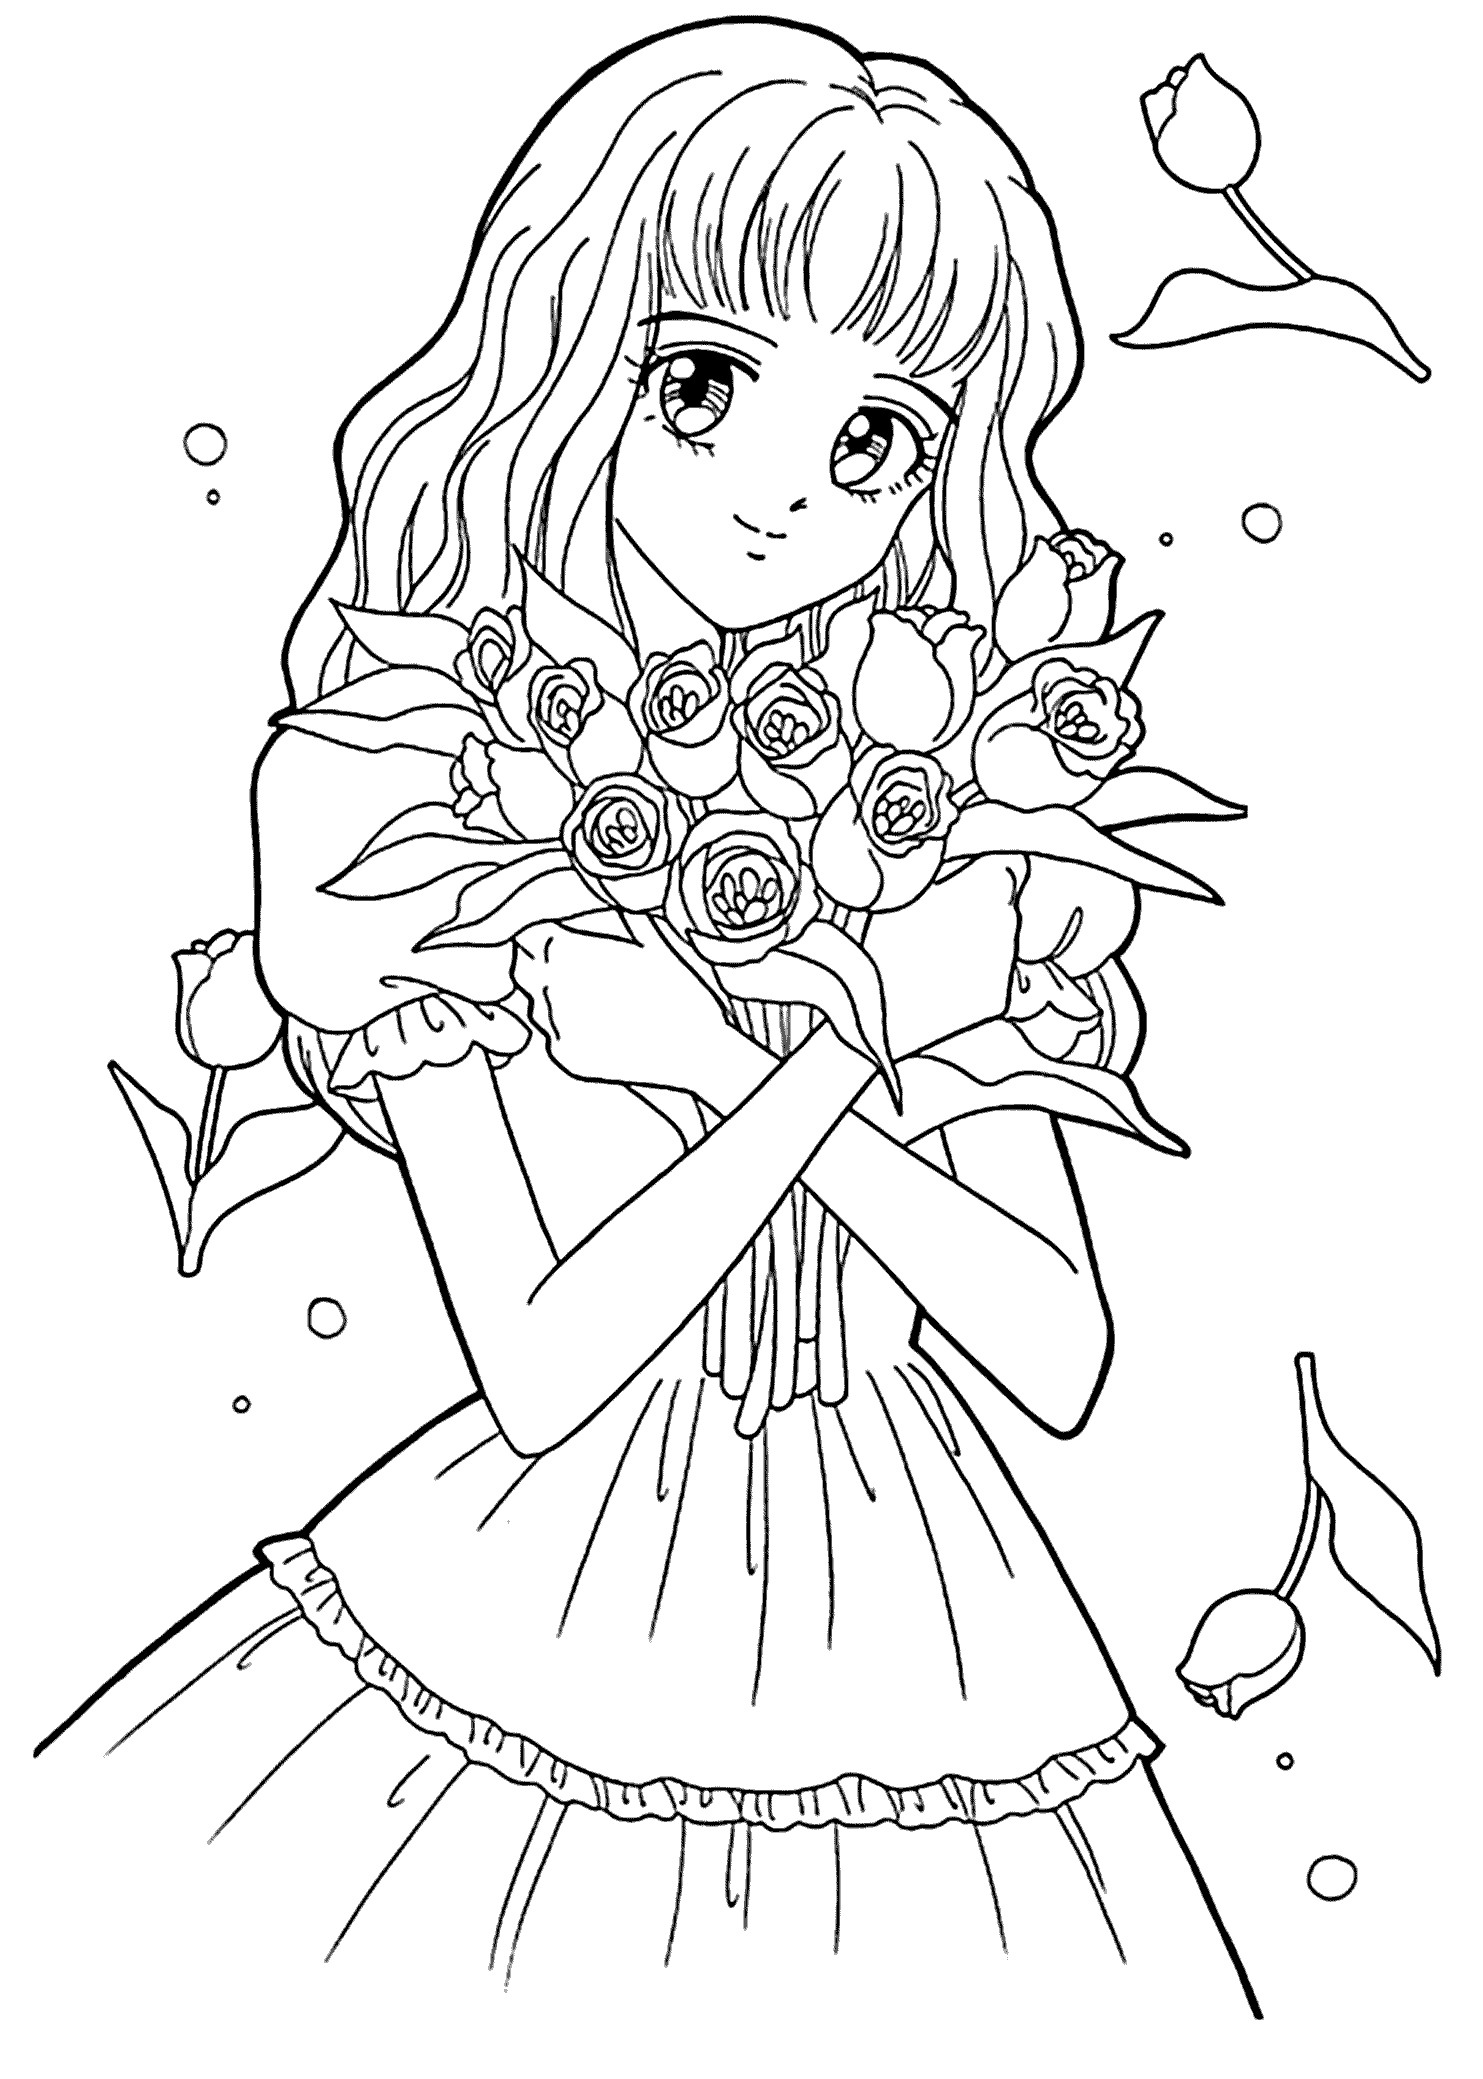 Coloring Sheets Of Girls
 Best Free Printable Coloring Pages for Kids and Teens